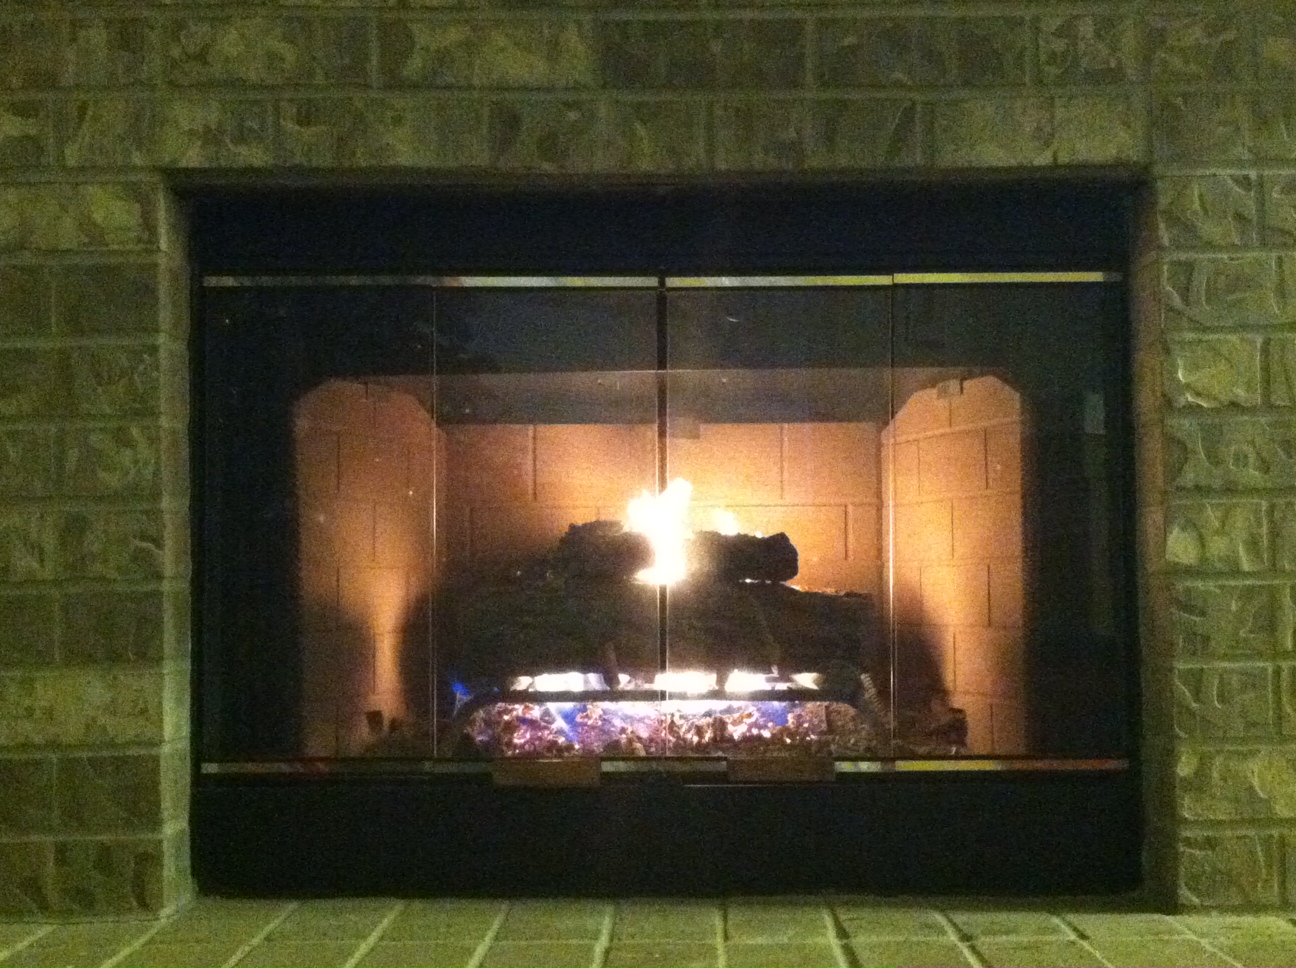 A ventless combustion fireplace has no chimney; it draws combustion air from and releases combustion byproducts to the room in which it is located.